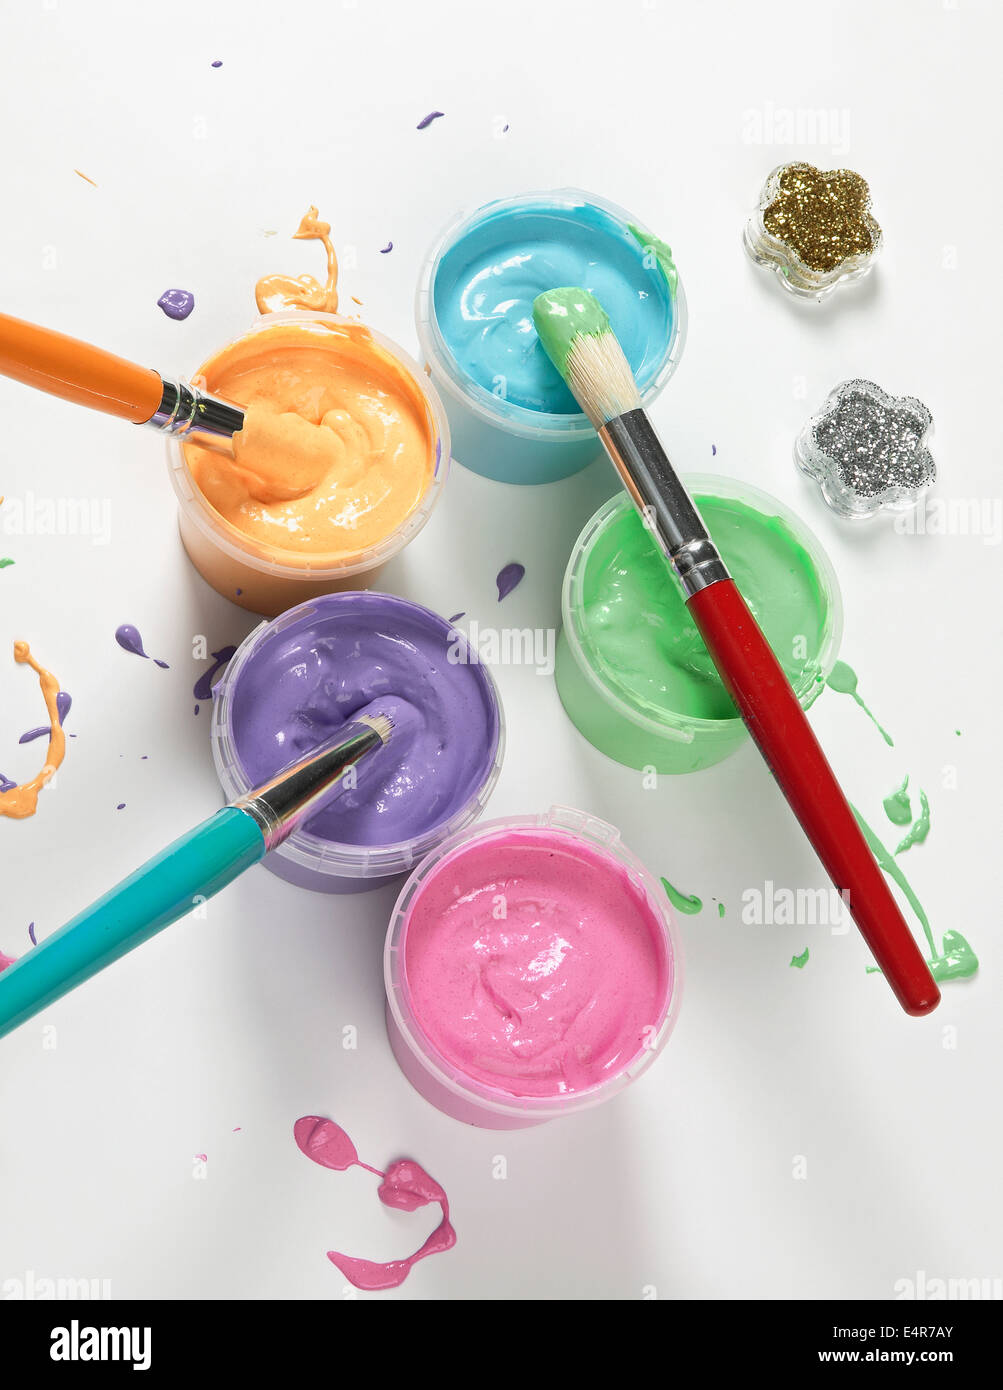 Pots of colourful paints, paintbrushes, and glitter Stock Photo